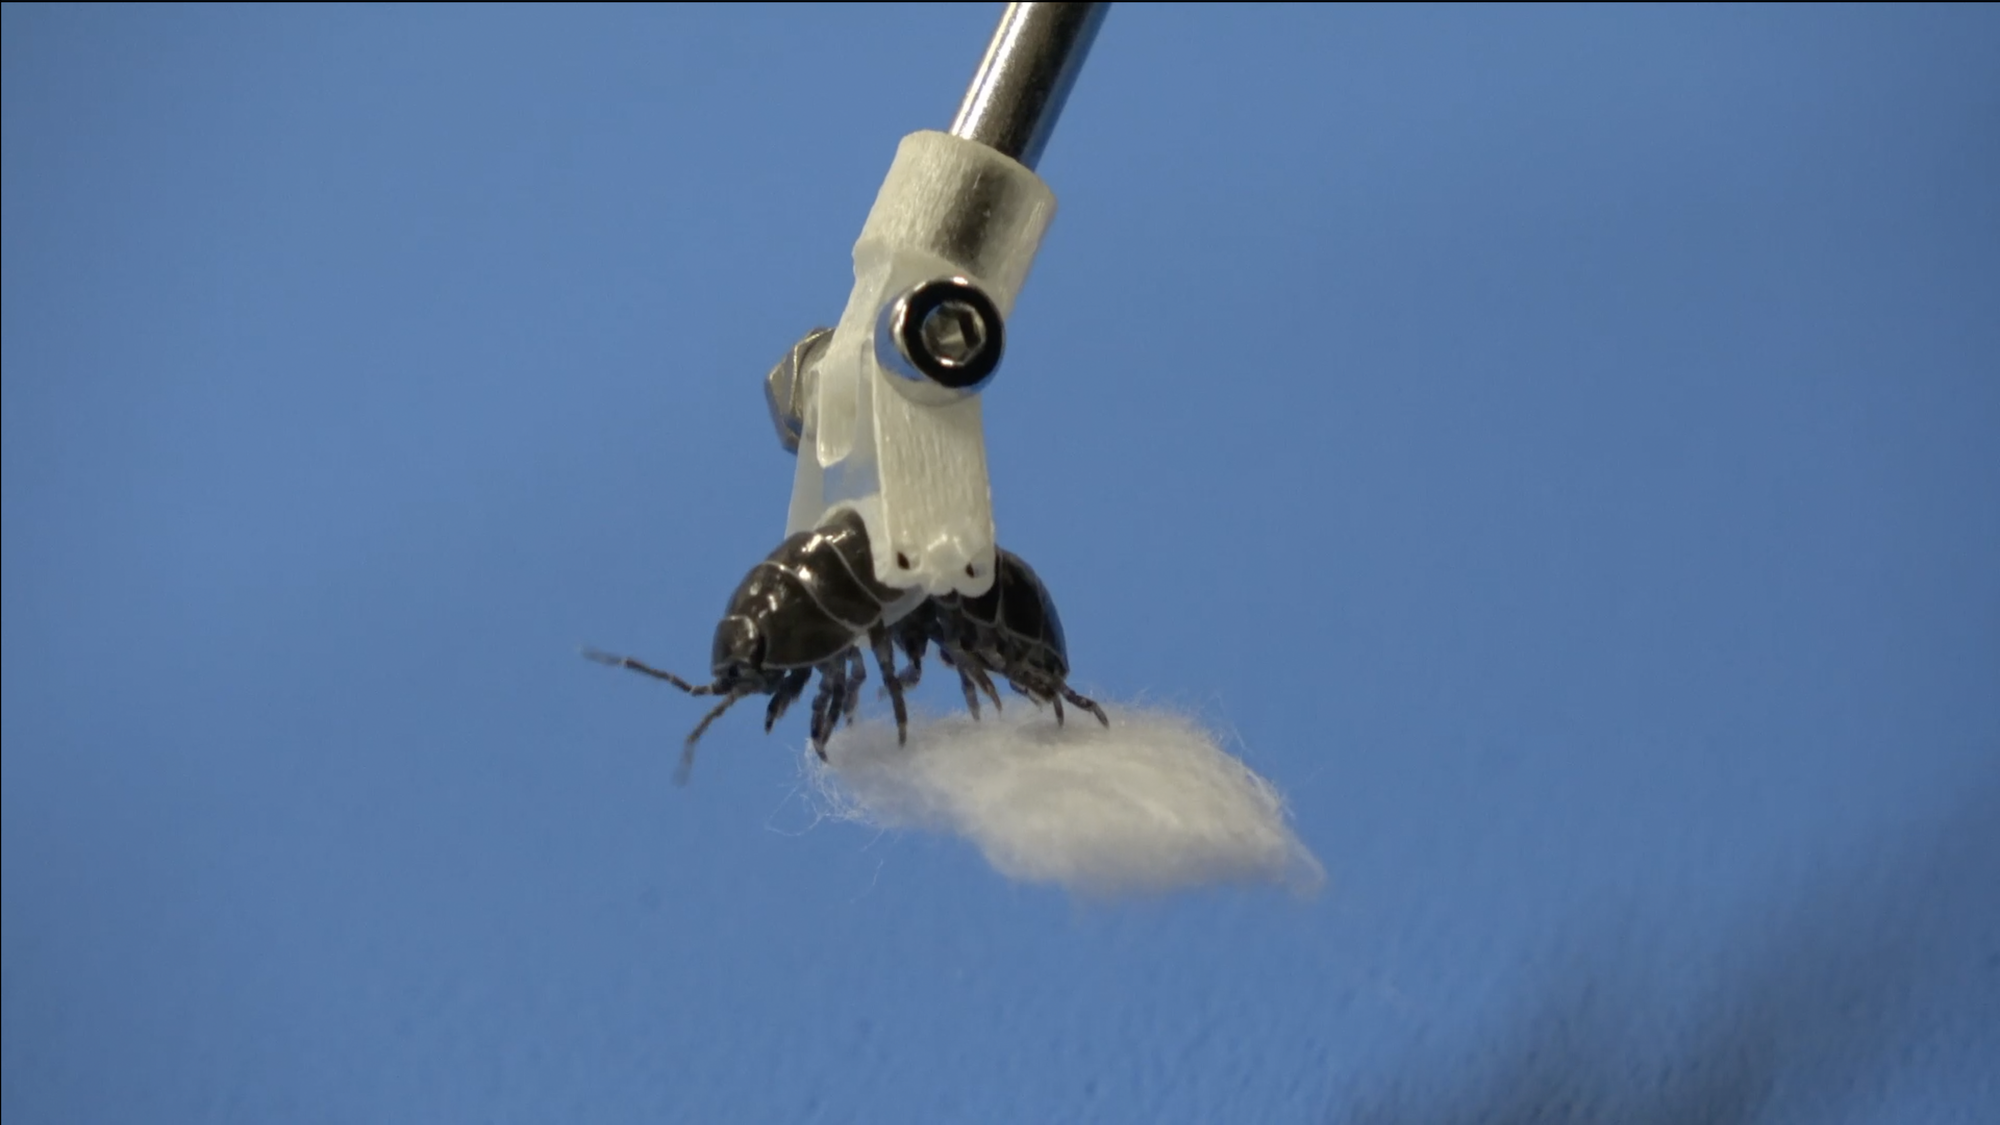 Robotic gripper holding pillbug that is gripping piece of cotton